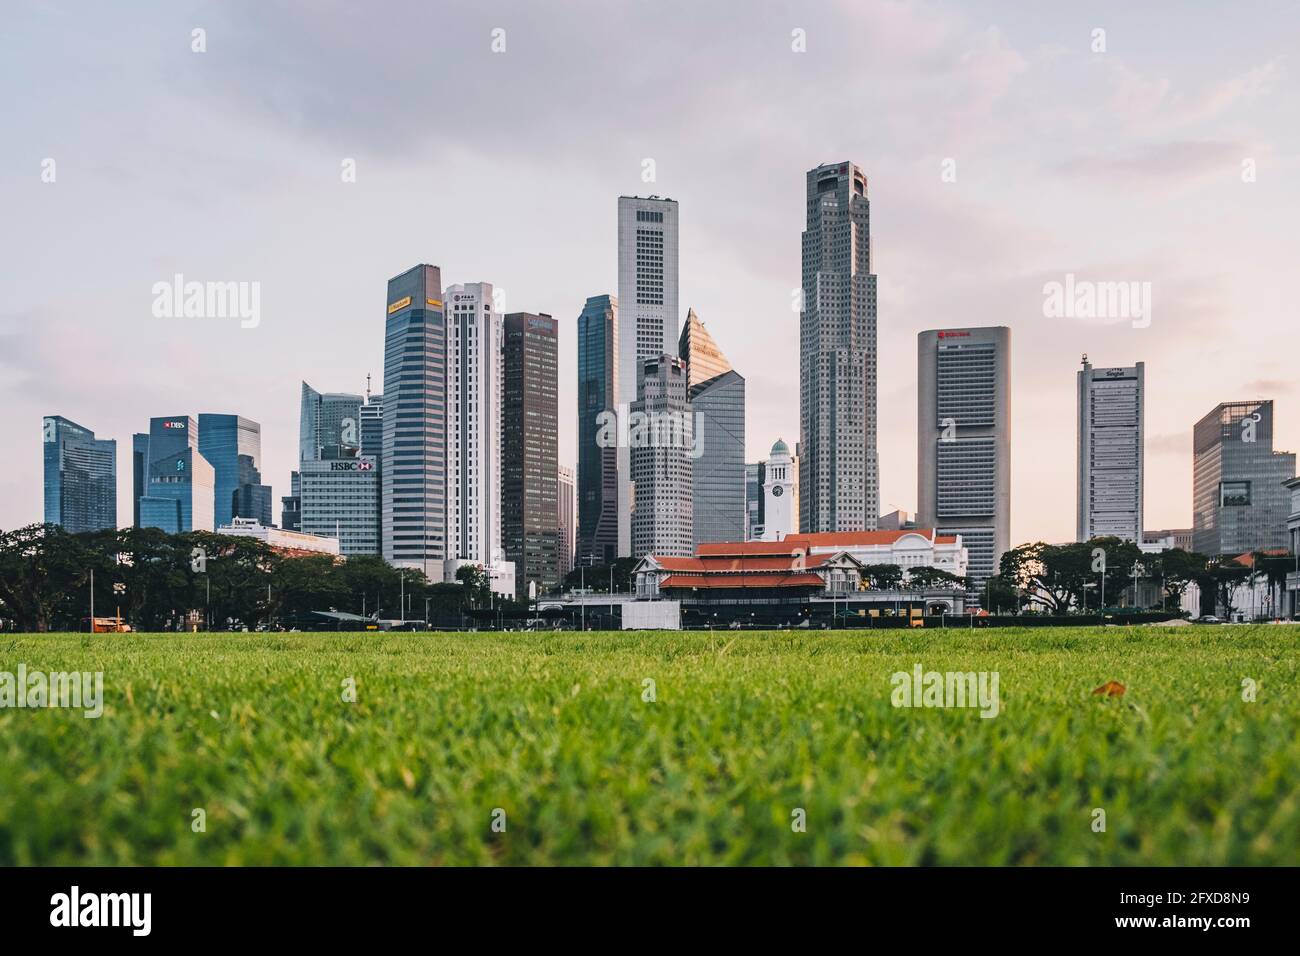 Padang playing green field with a low angle of the city skyline featuring financial district, Singapore. Stock Photo